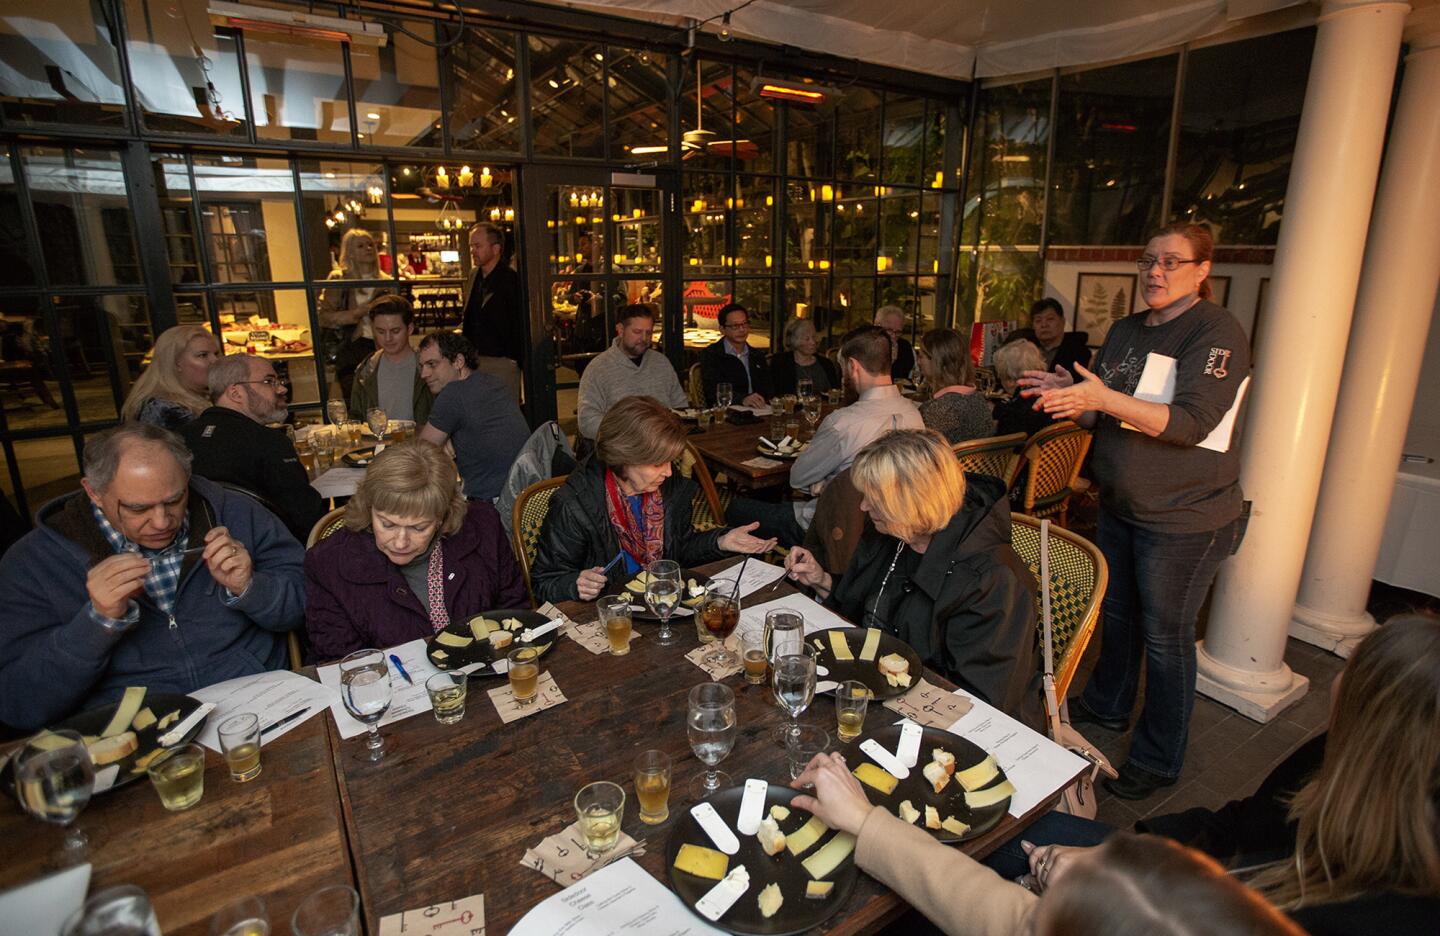 SideDoor’s resident cheese expert, Tracy Nelsen, teaches a cheese education class during the semiannual Cheese & Charcuterie Backyard Party hosted at the English pub within Five Crowns.